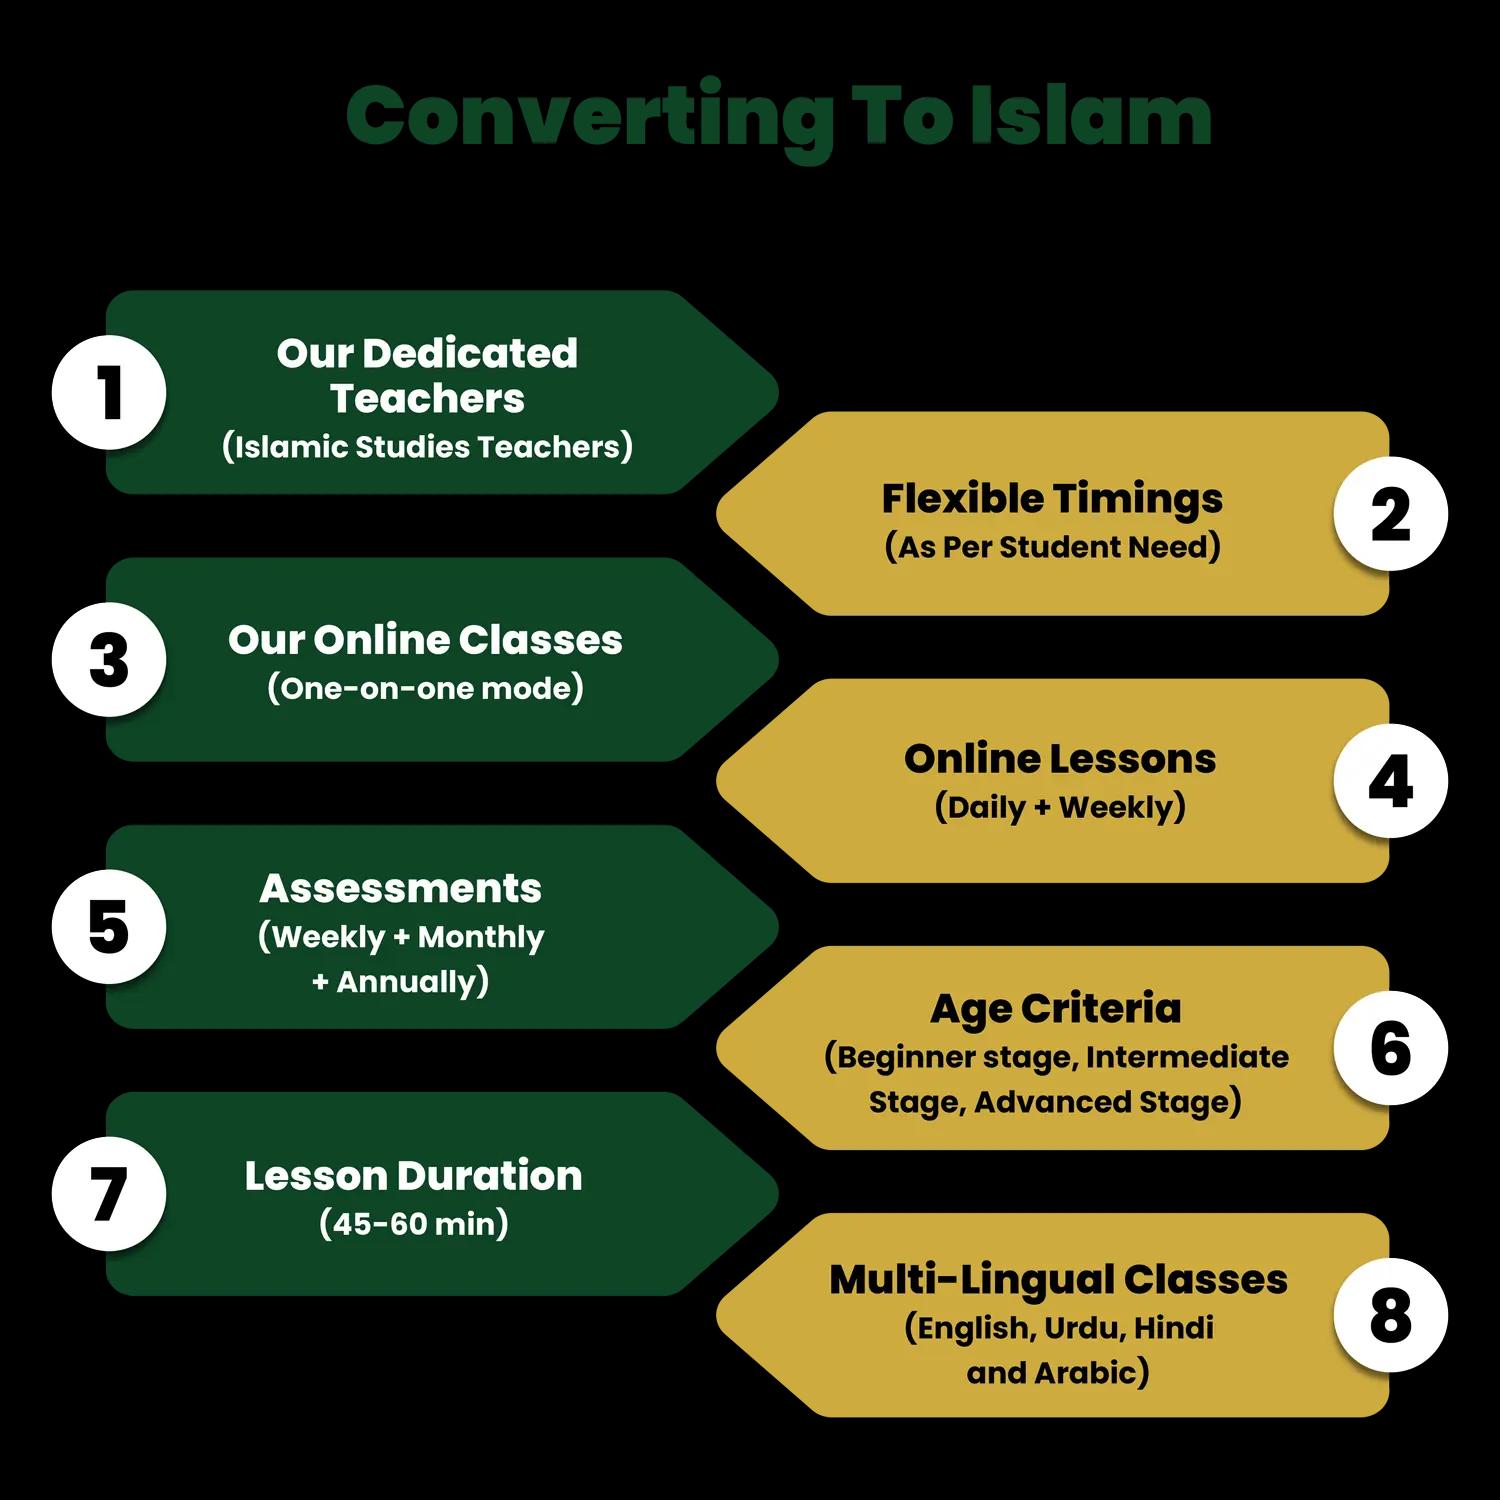 Converting To Islam Course Features